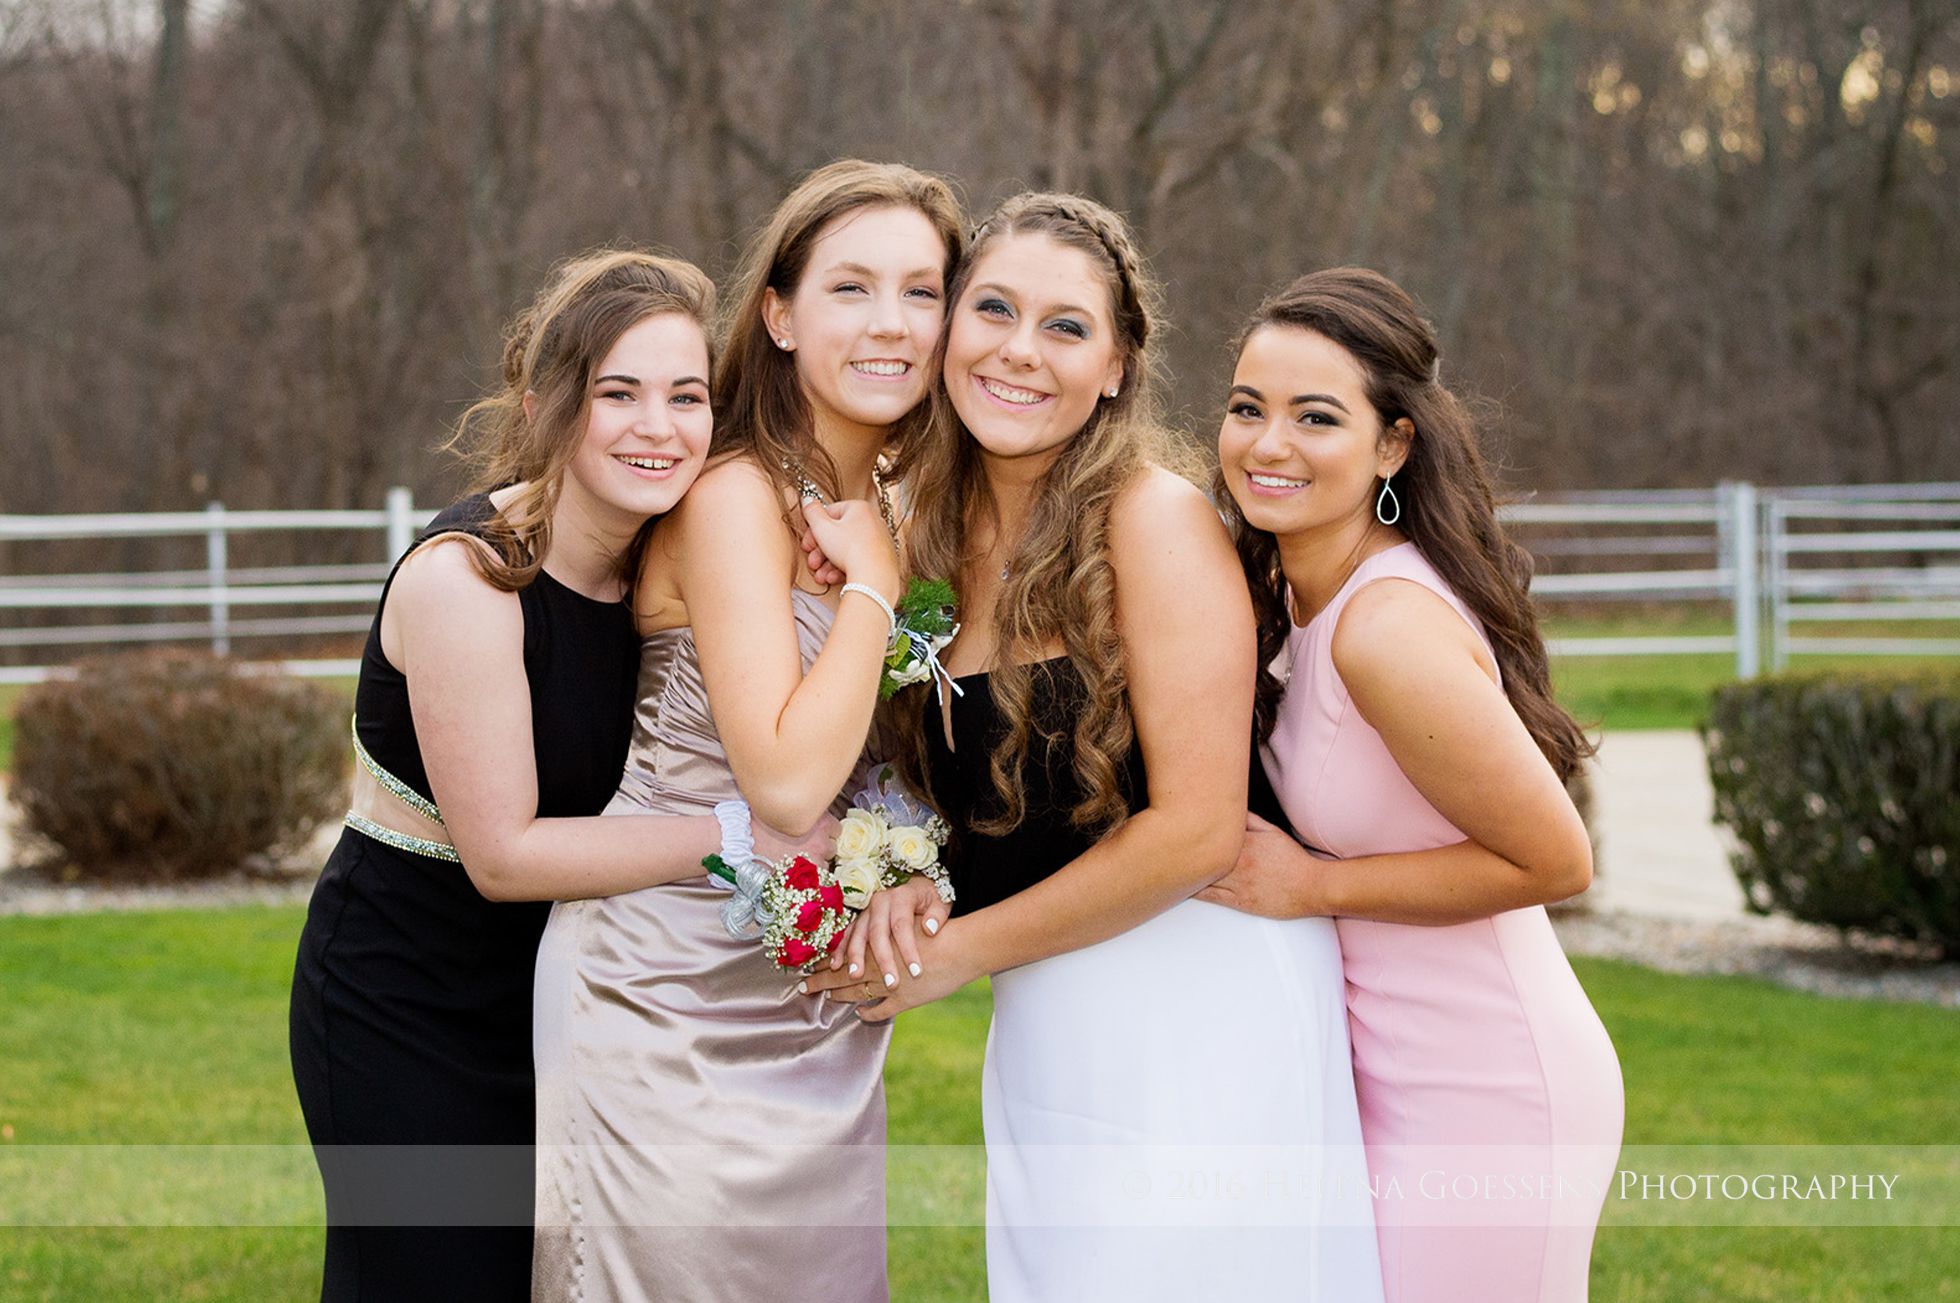 Four girls in prom dresses